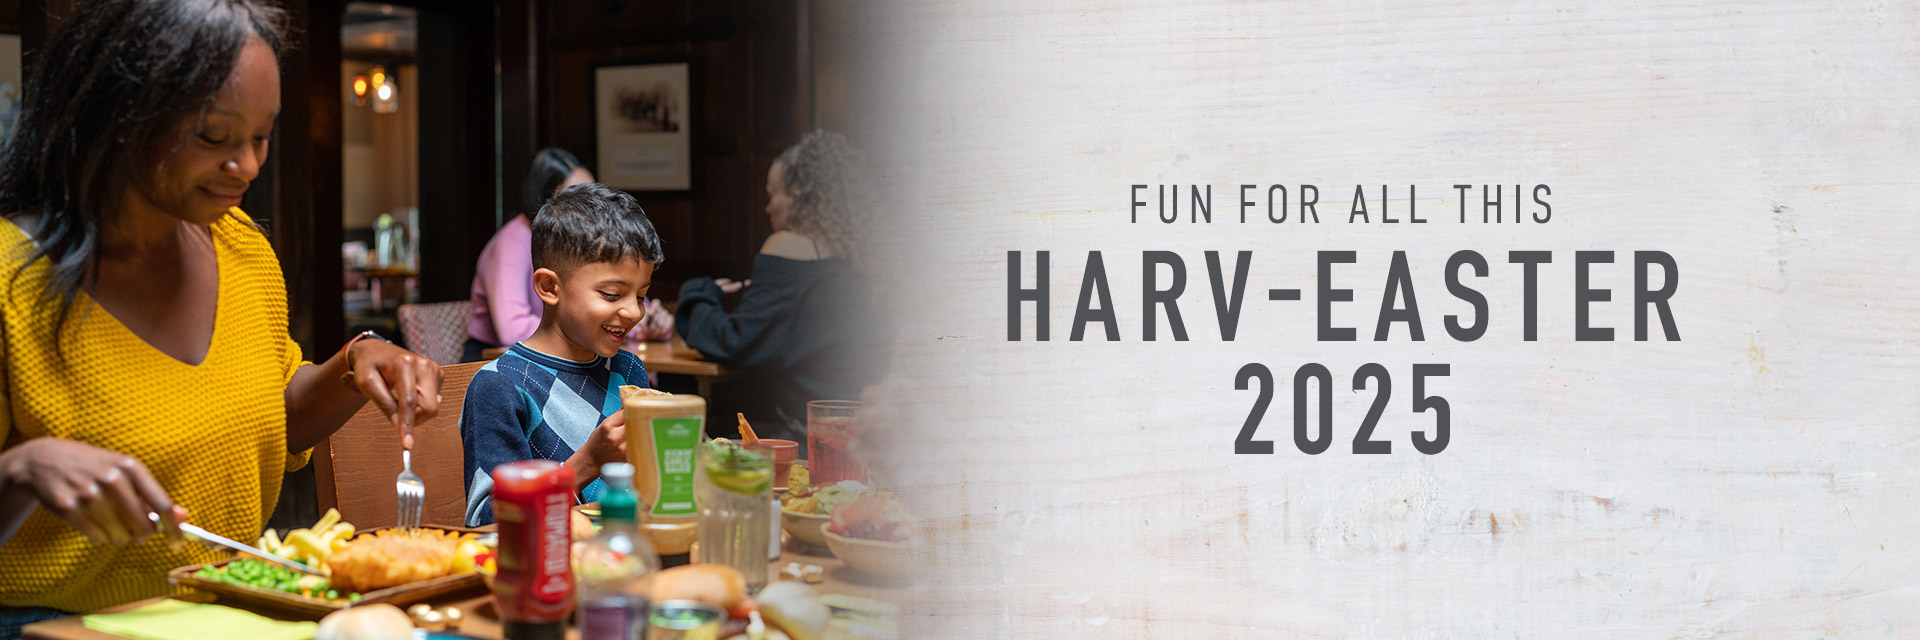 Easter at Harvester Cardiff Bay in Cardiff 2025